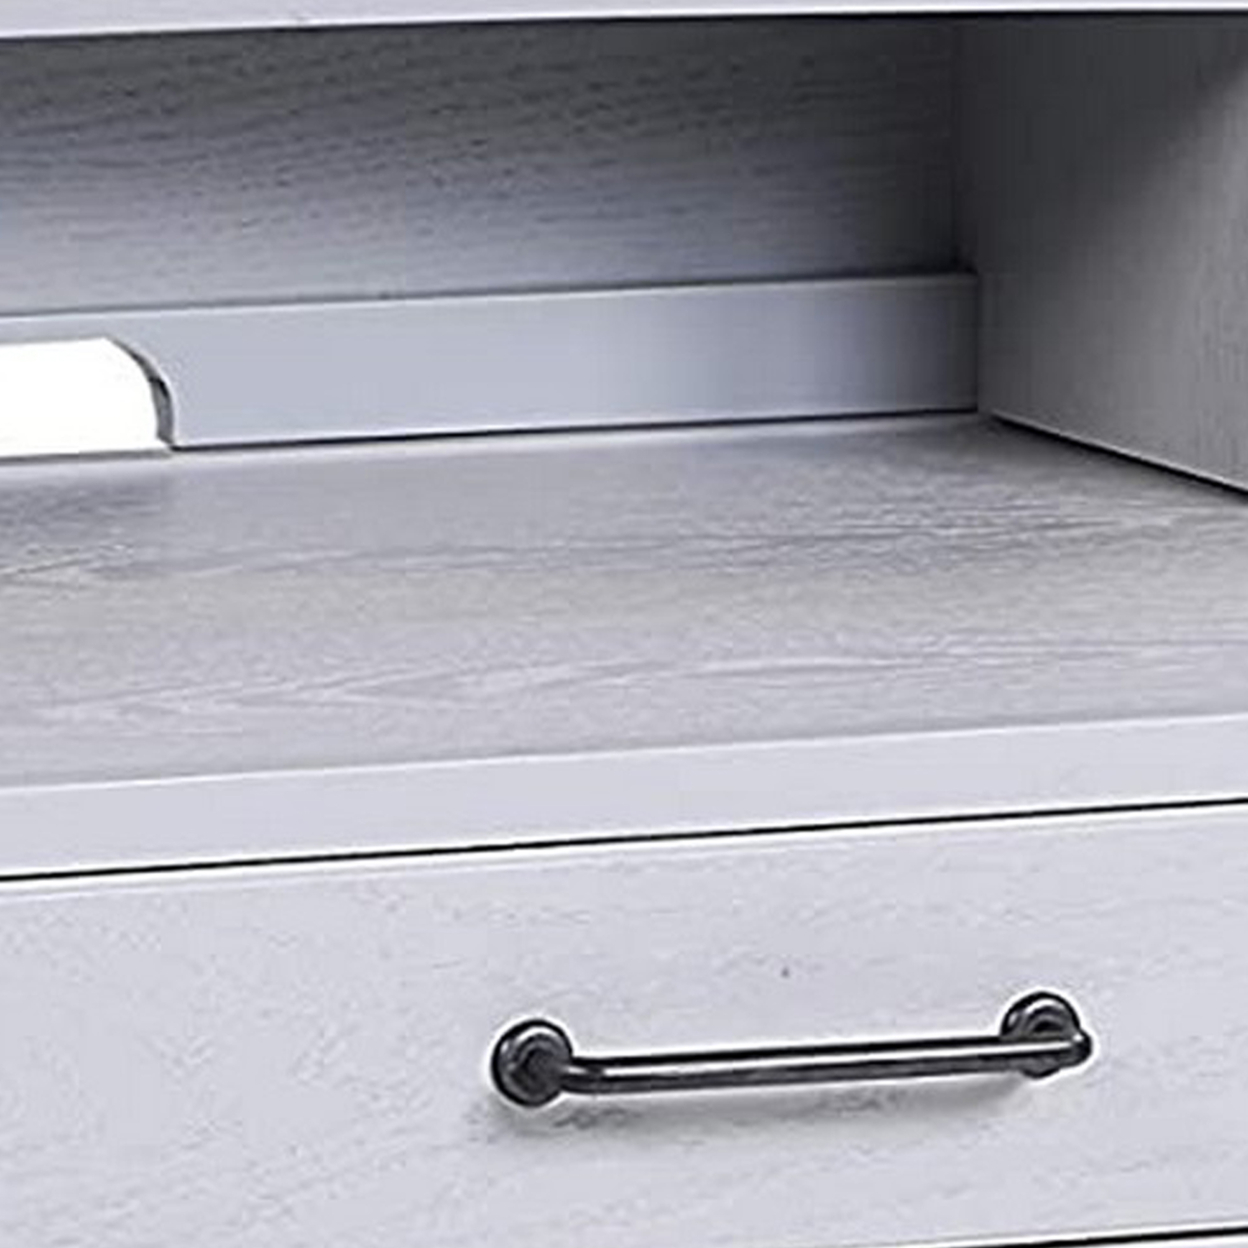 5 Drawer Wooden Desk With Ring Pulls And Metal Braces, Gray- Saltoro Sherpi